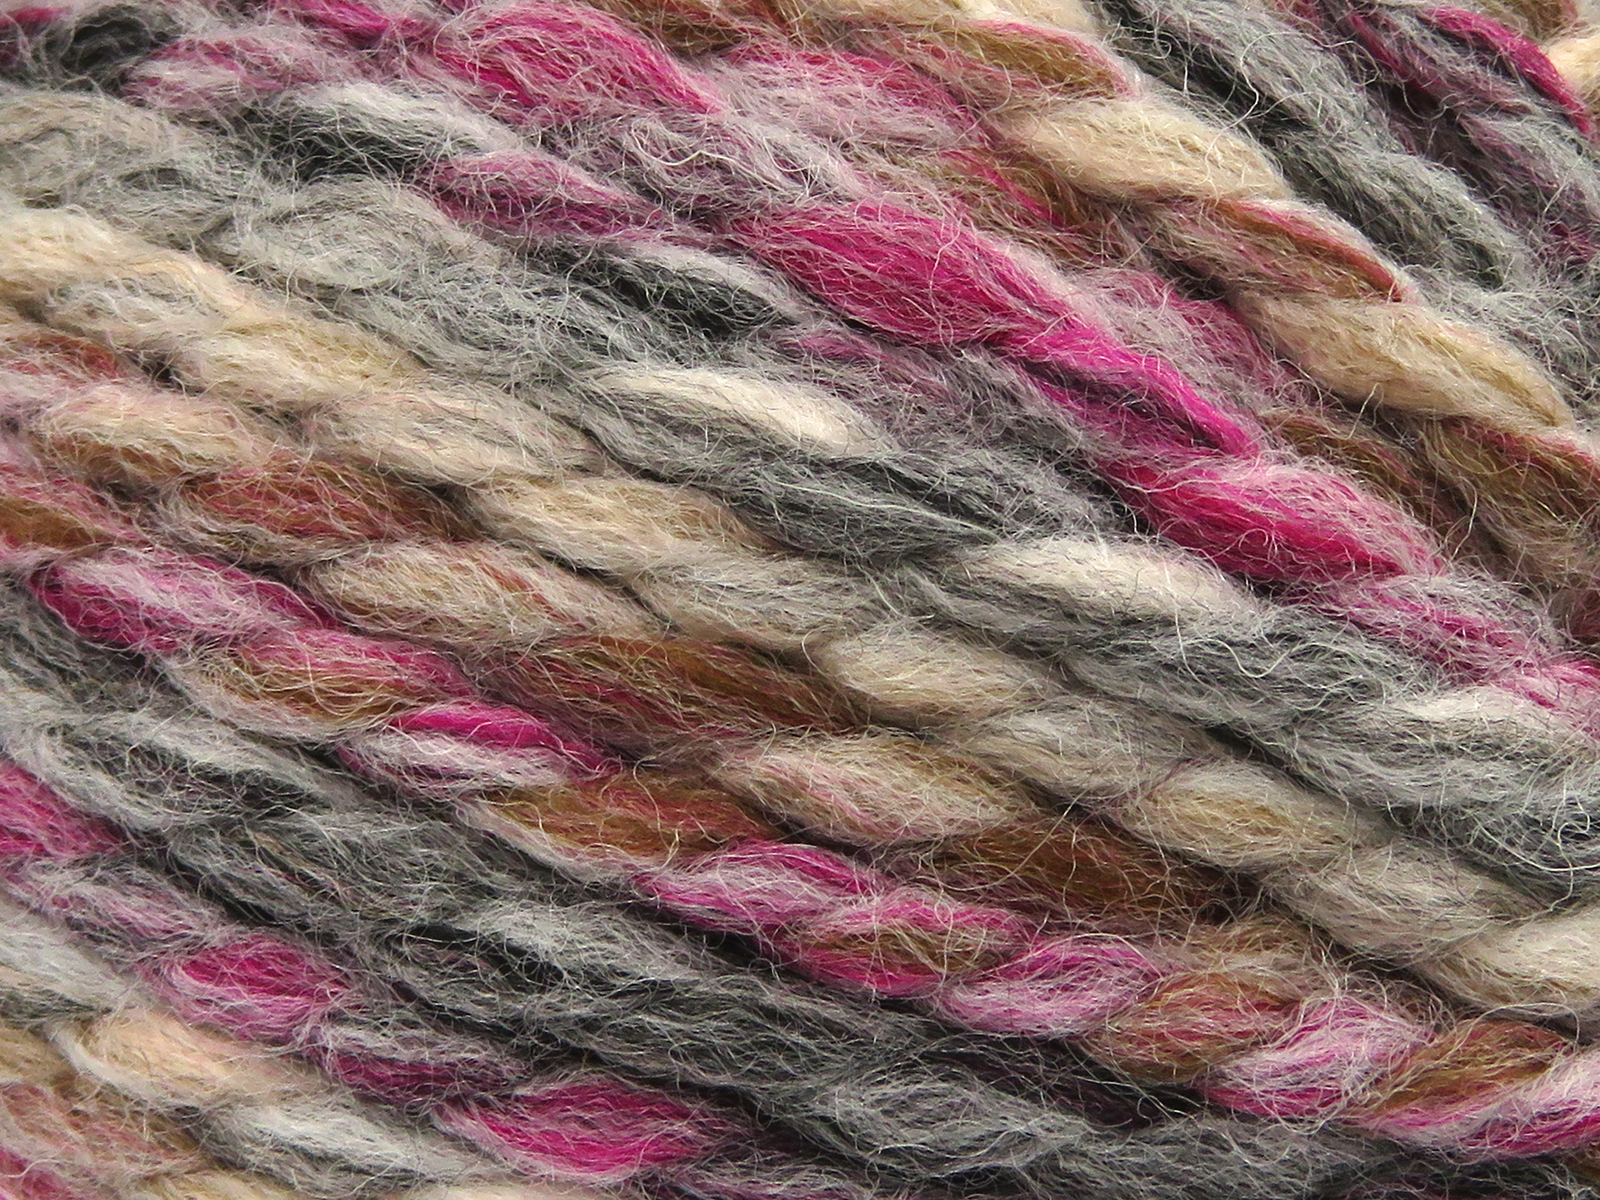 Unger Aloha Chunky Yarn - Shades of Grey, Brown & White - New